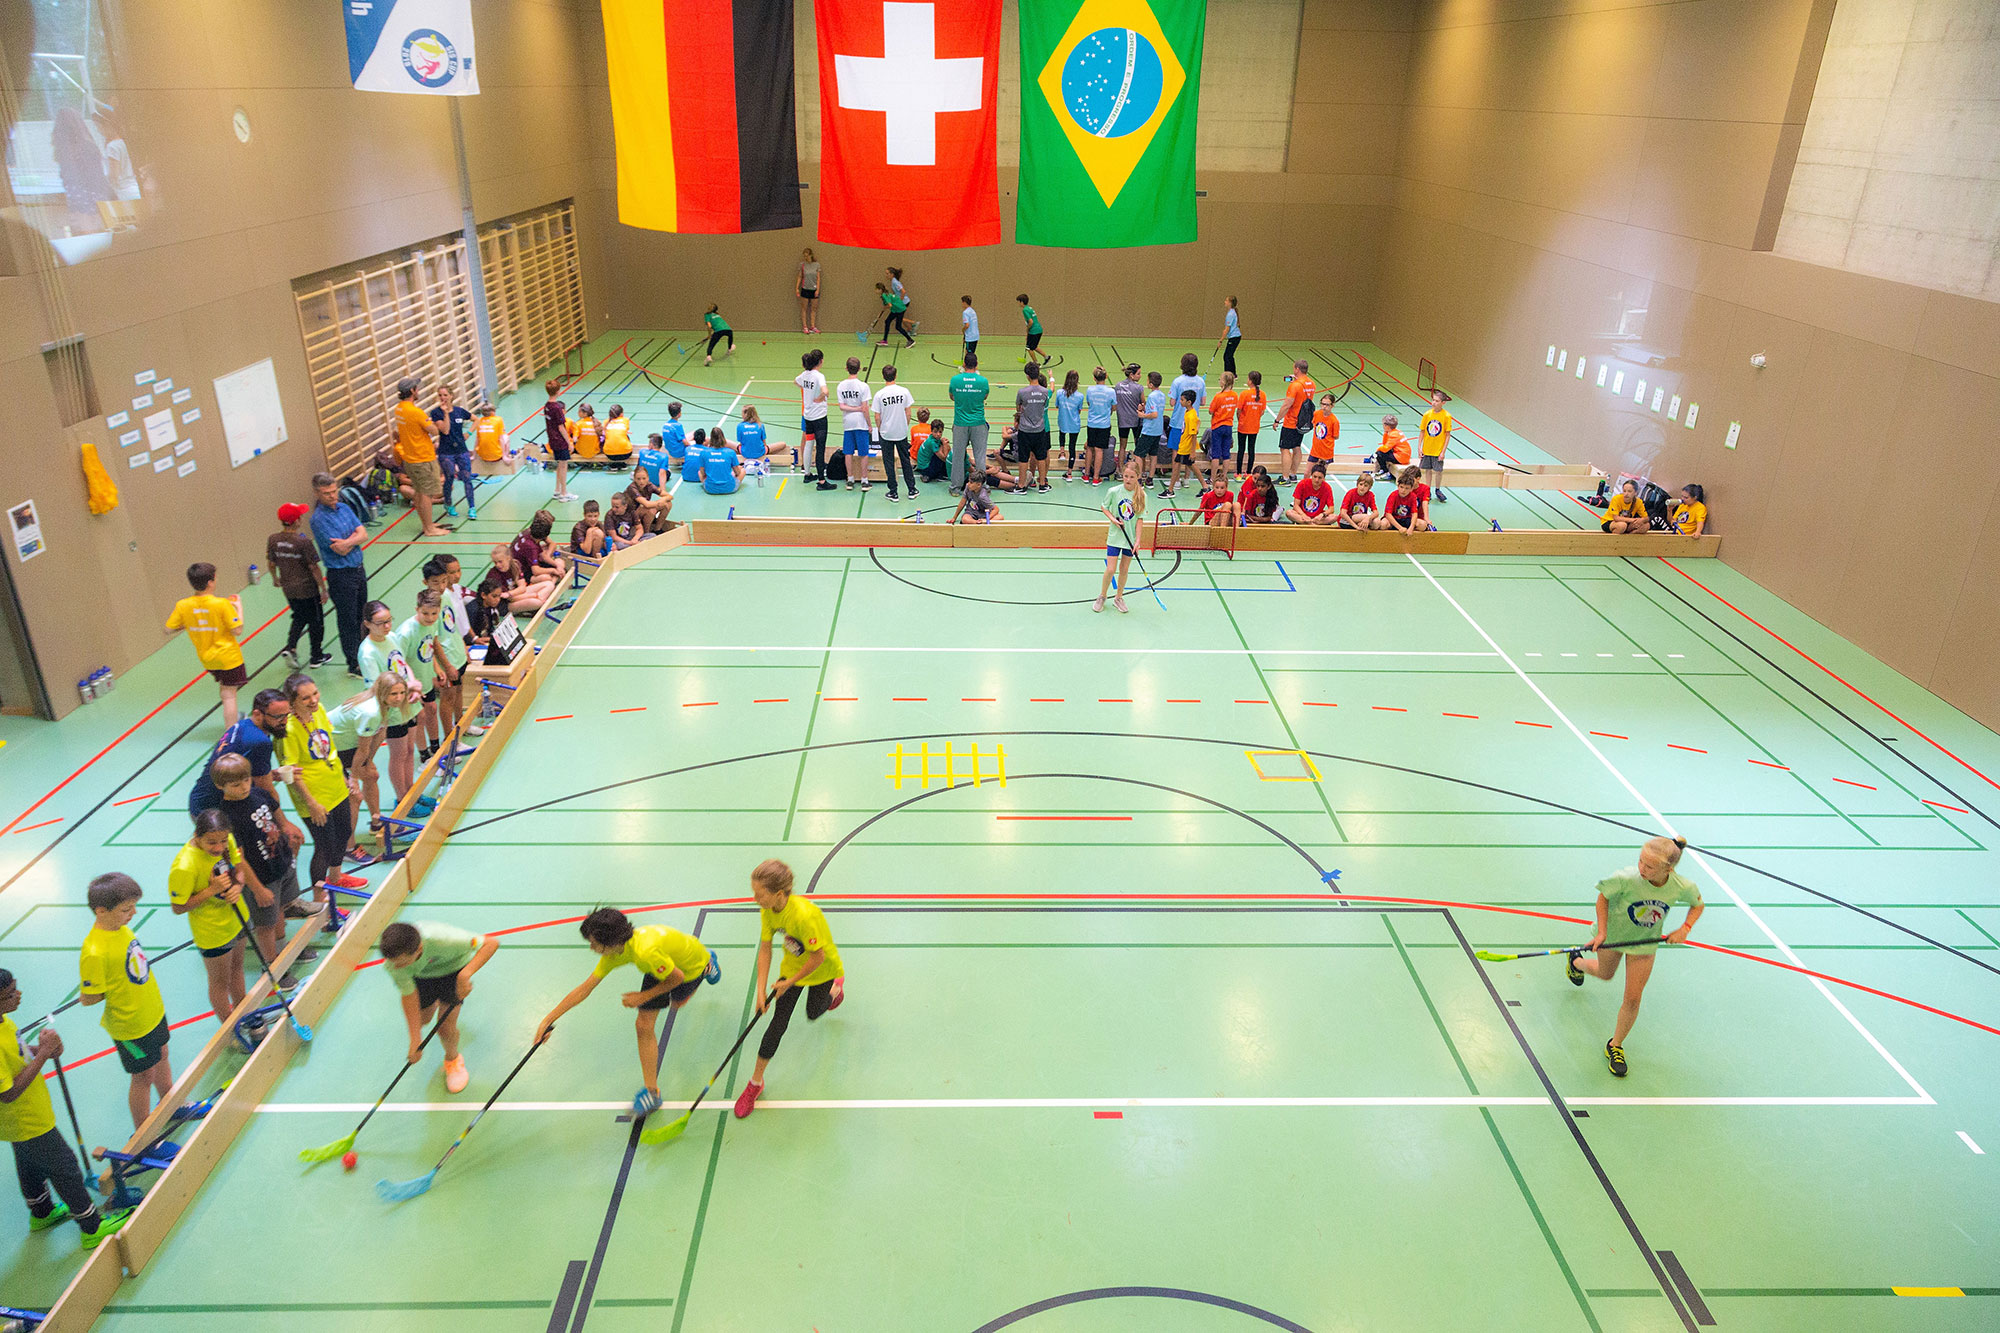 The SIS Cup floorball tournament takes place in a big school gym. The national flags of Germany, Brazil and Switzerland hang from the ceiling.	